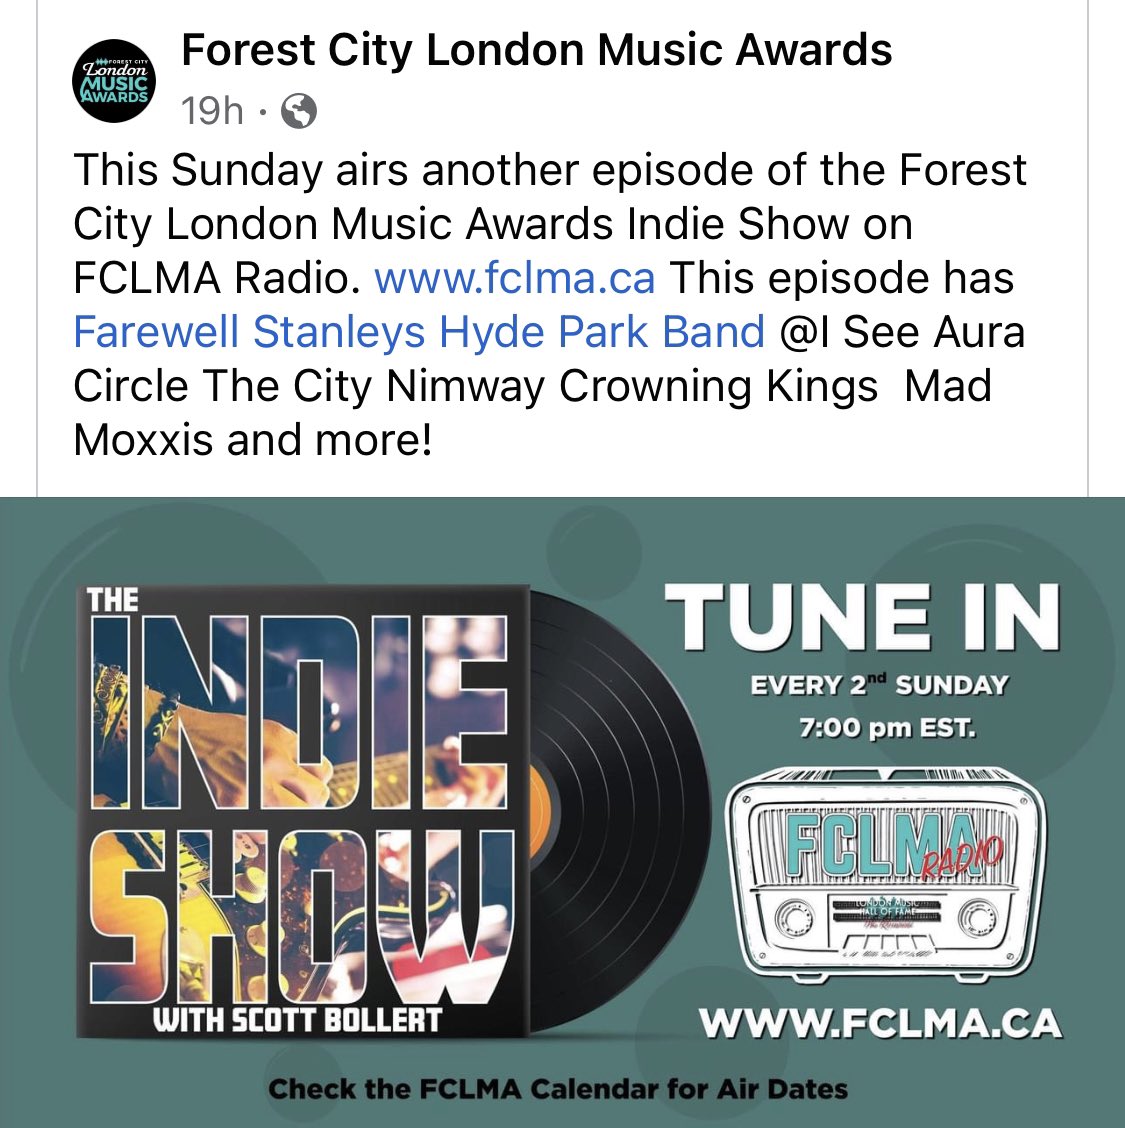 7pm tonight on The Indie Show! Link: fclma.ca 
#fclmaradio #indieshow #forestcitylondonmusicawards